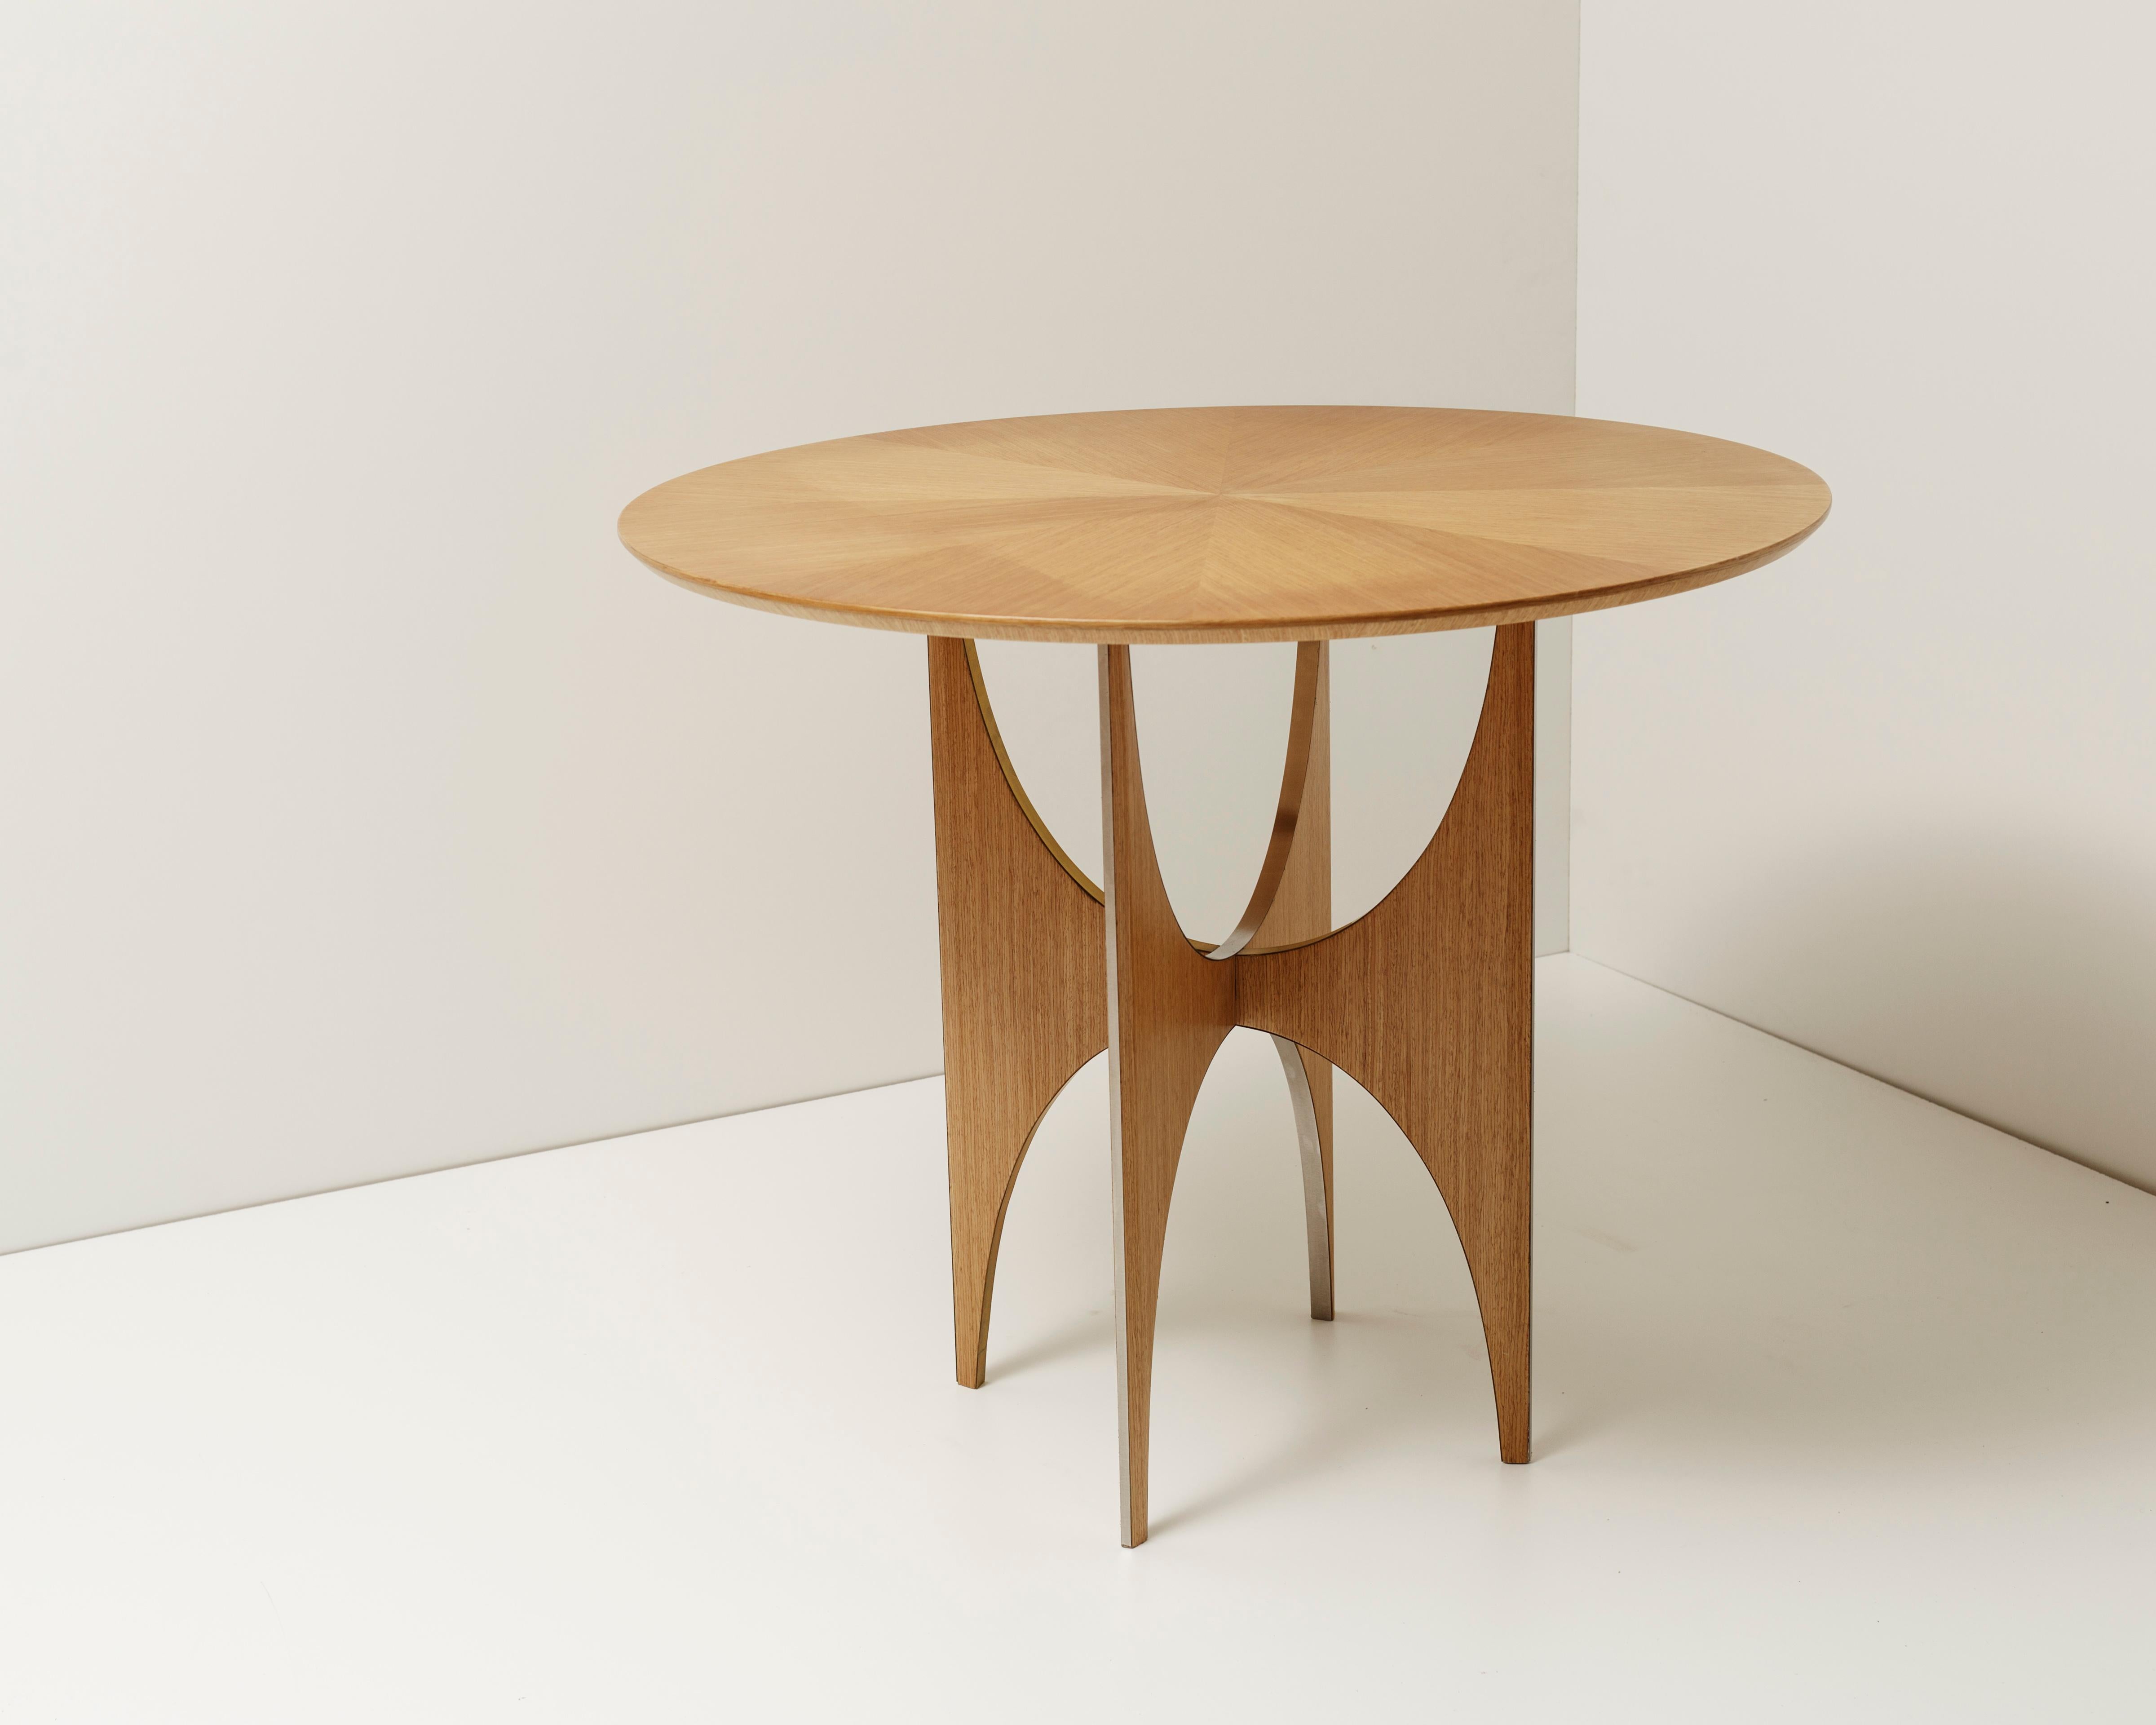 Arc round coffee table by Ana Volante Studio
The Moon Collection
Dimensions: Ø 90 x H 75 cm
Materials: Oakwood, rose wood, stainless steel and brass

Ana Volante, founder of Ana Volante Studio, is a Venezuelan designer specialized in interior